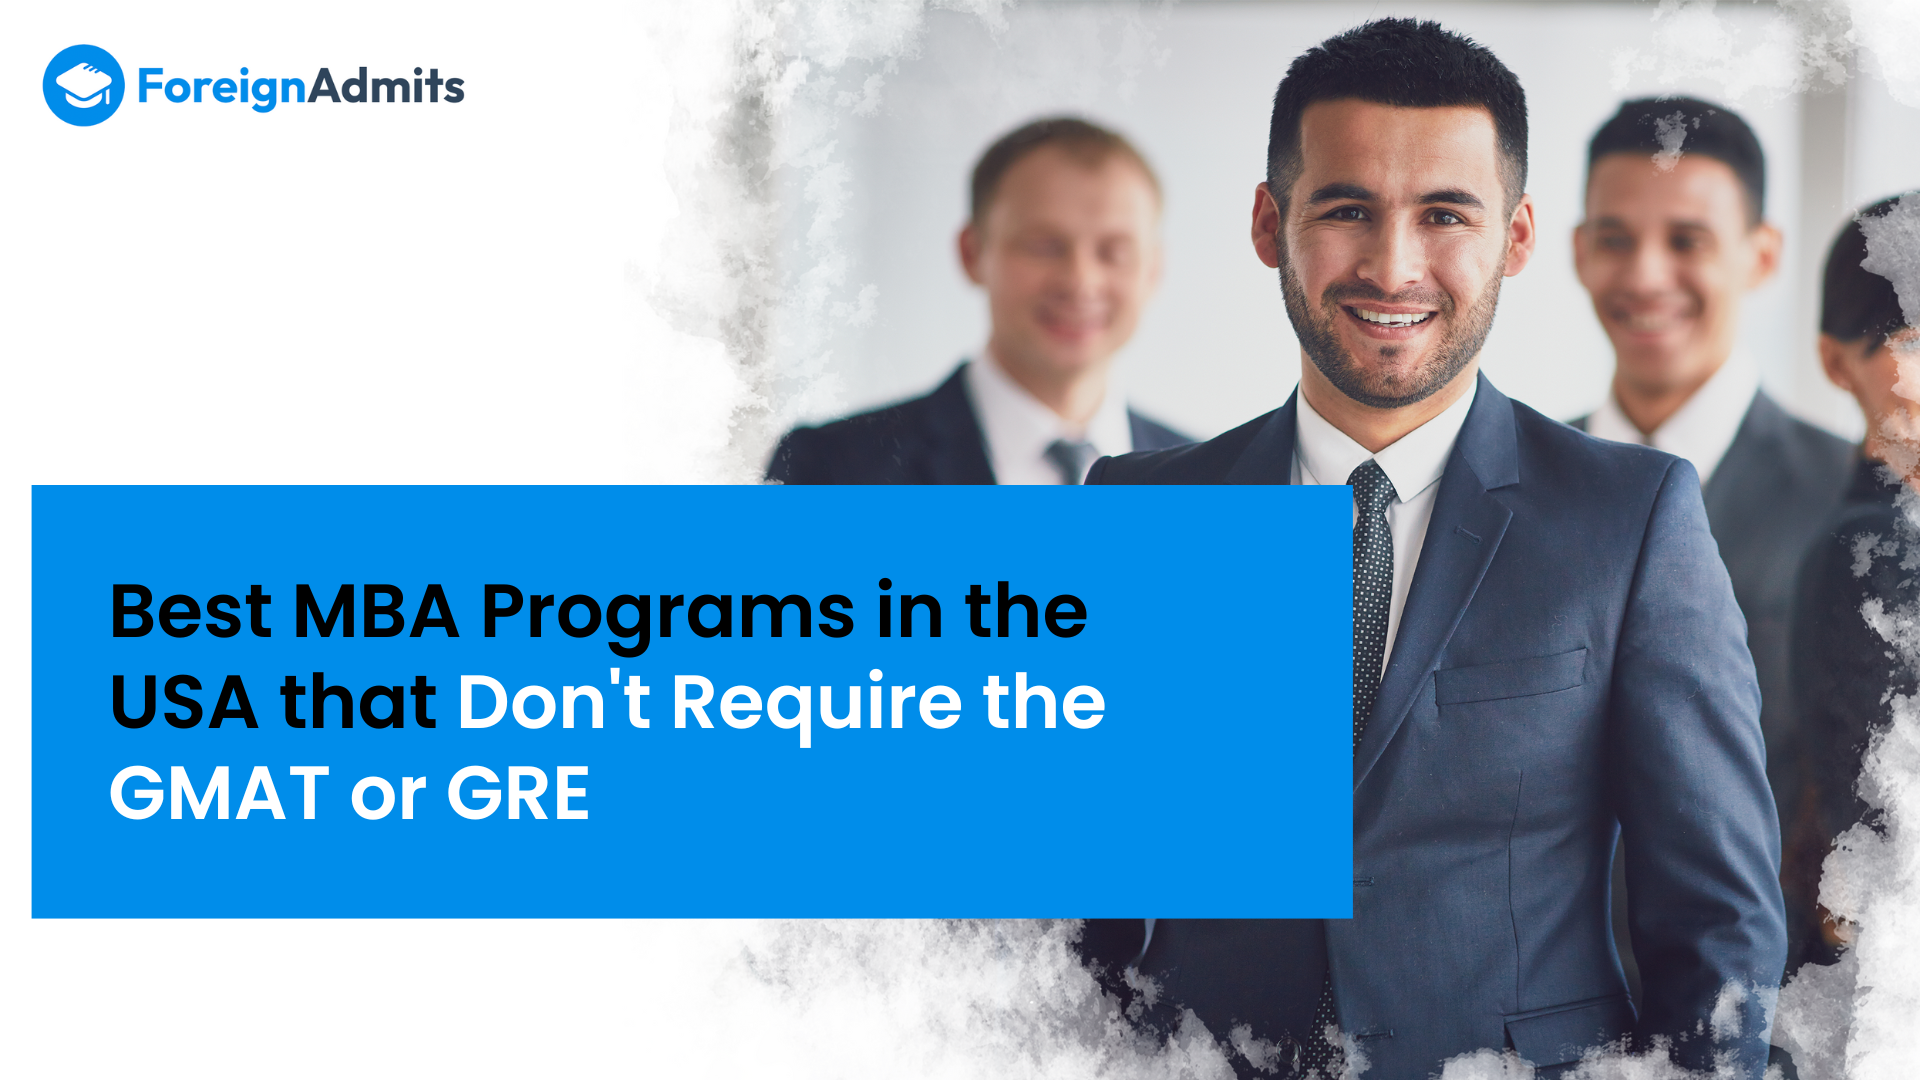 Best MBA Programs in the USA that Don’t Require the GMAT or GRE